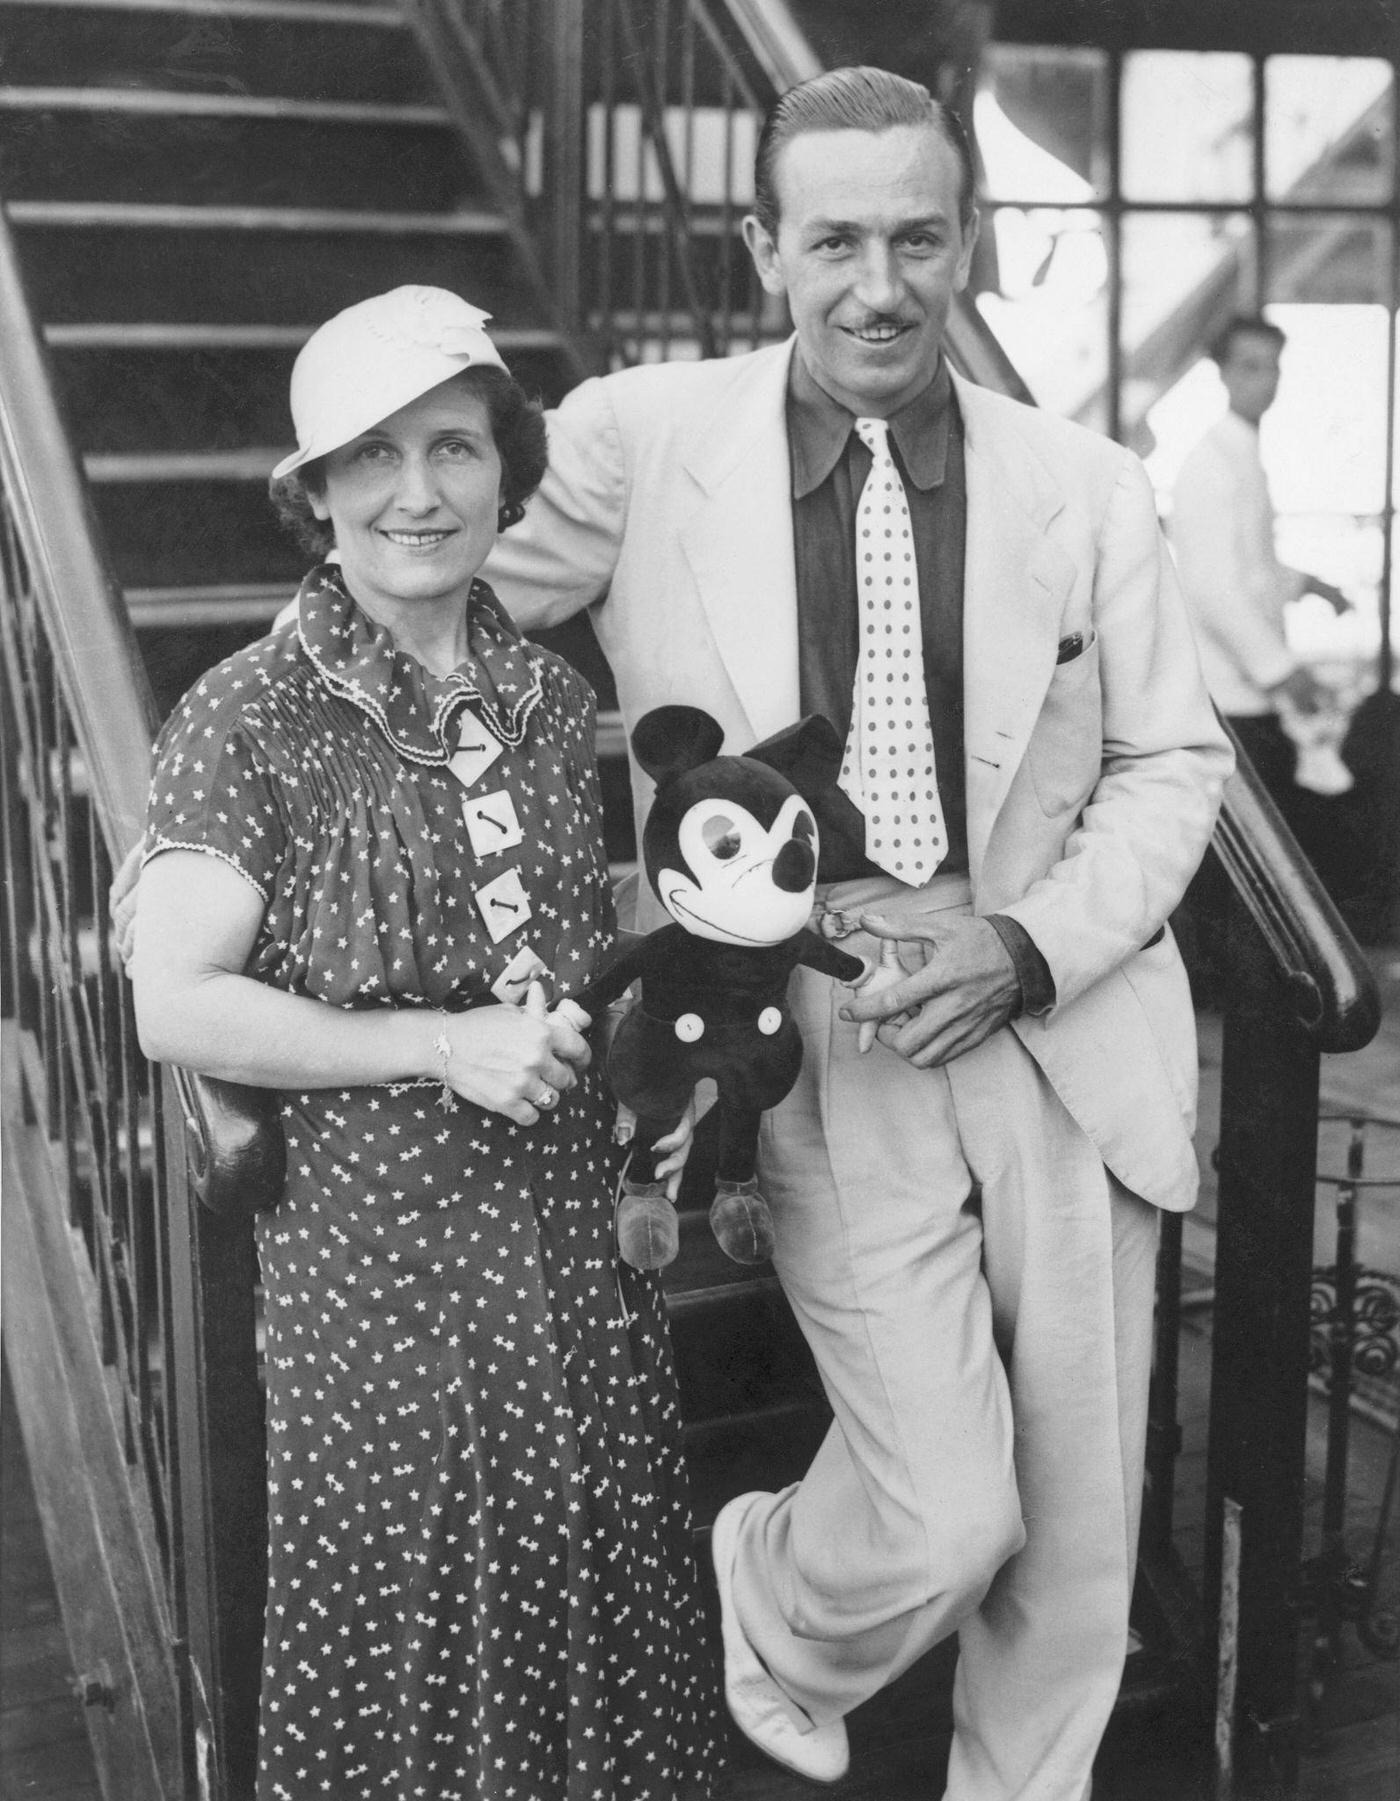 Walt Disney with wife and Micky Mouse during a visite in New York, 1935